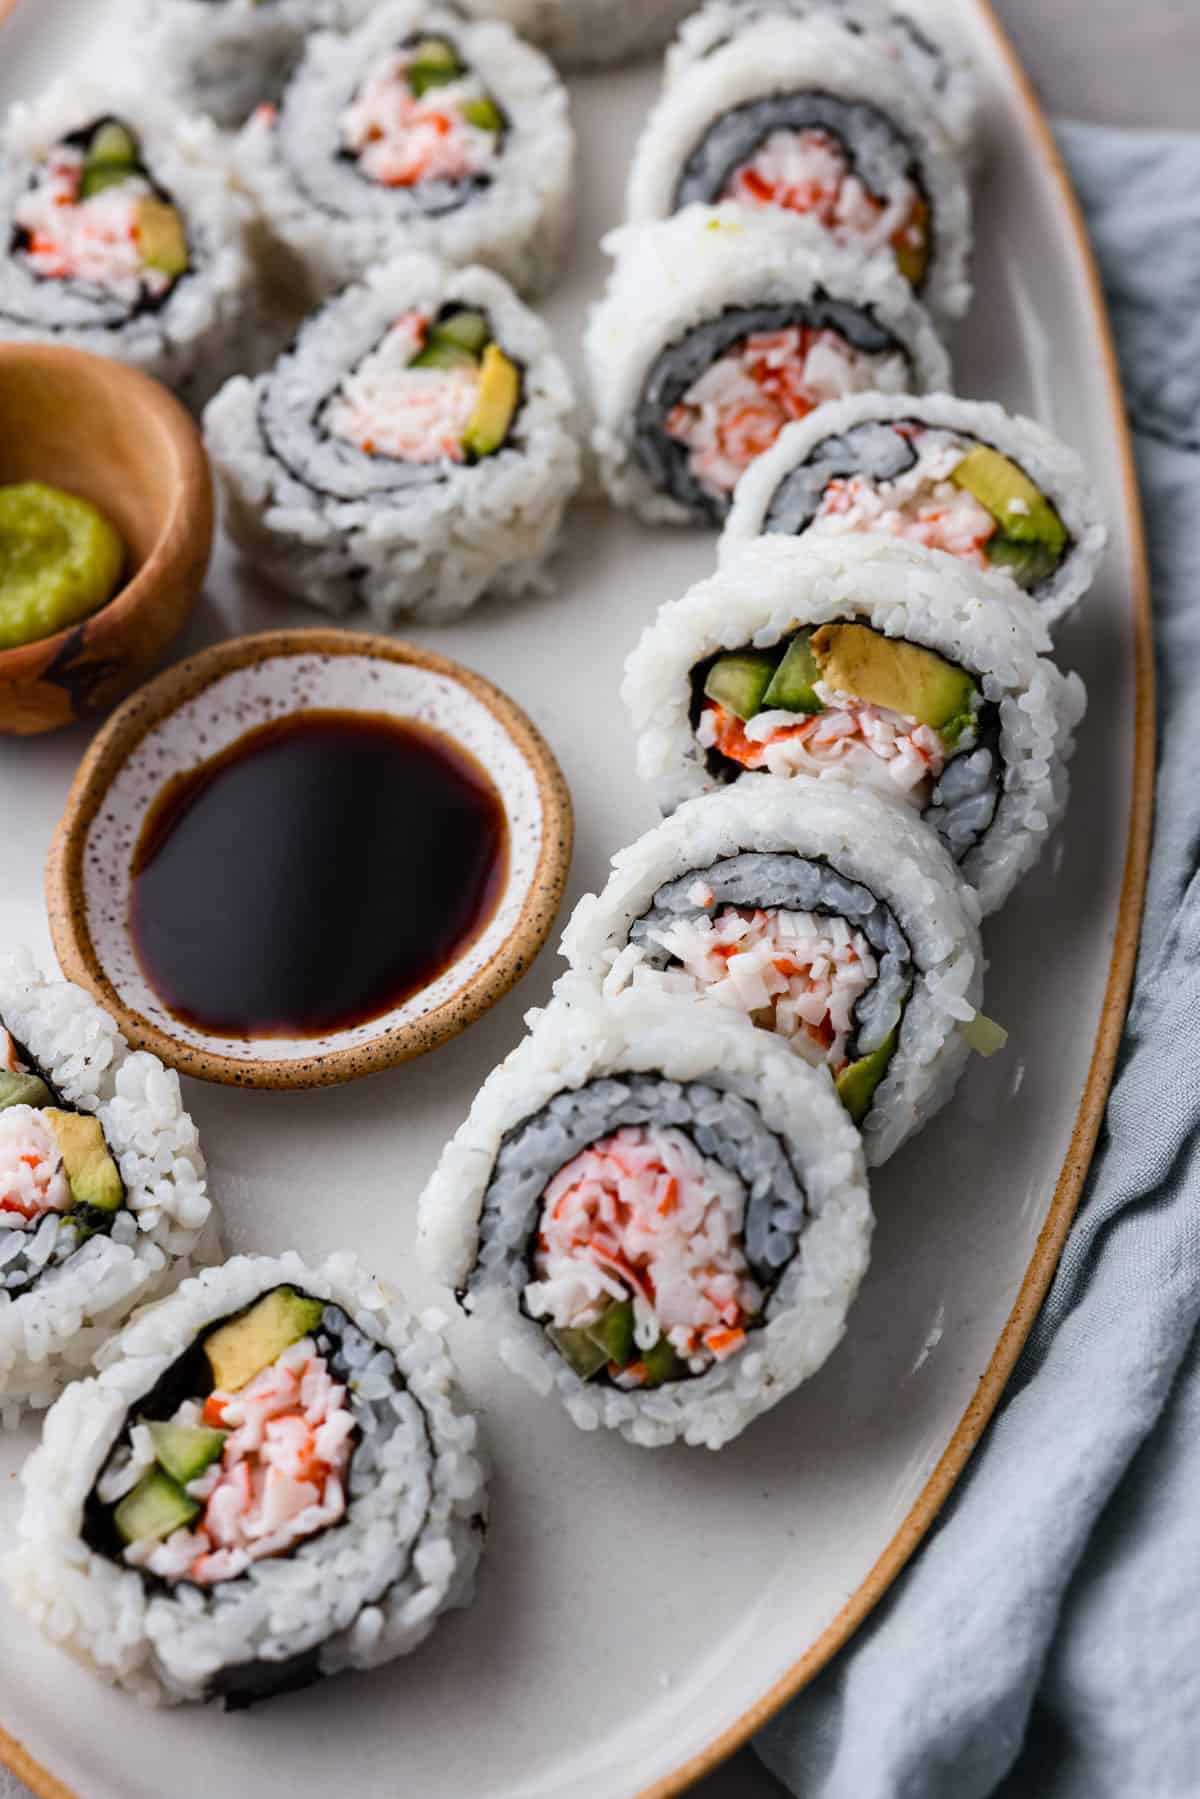 Sushi rolls served with soy sauce in a small bowl.